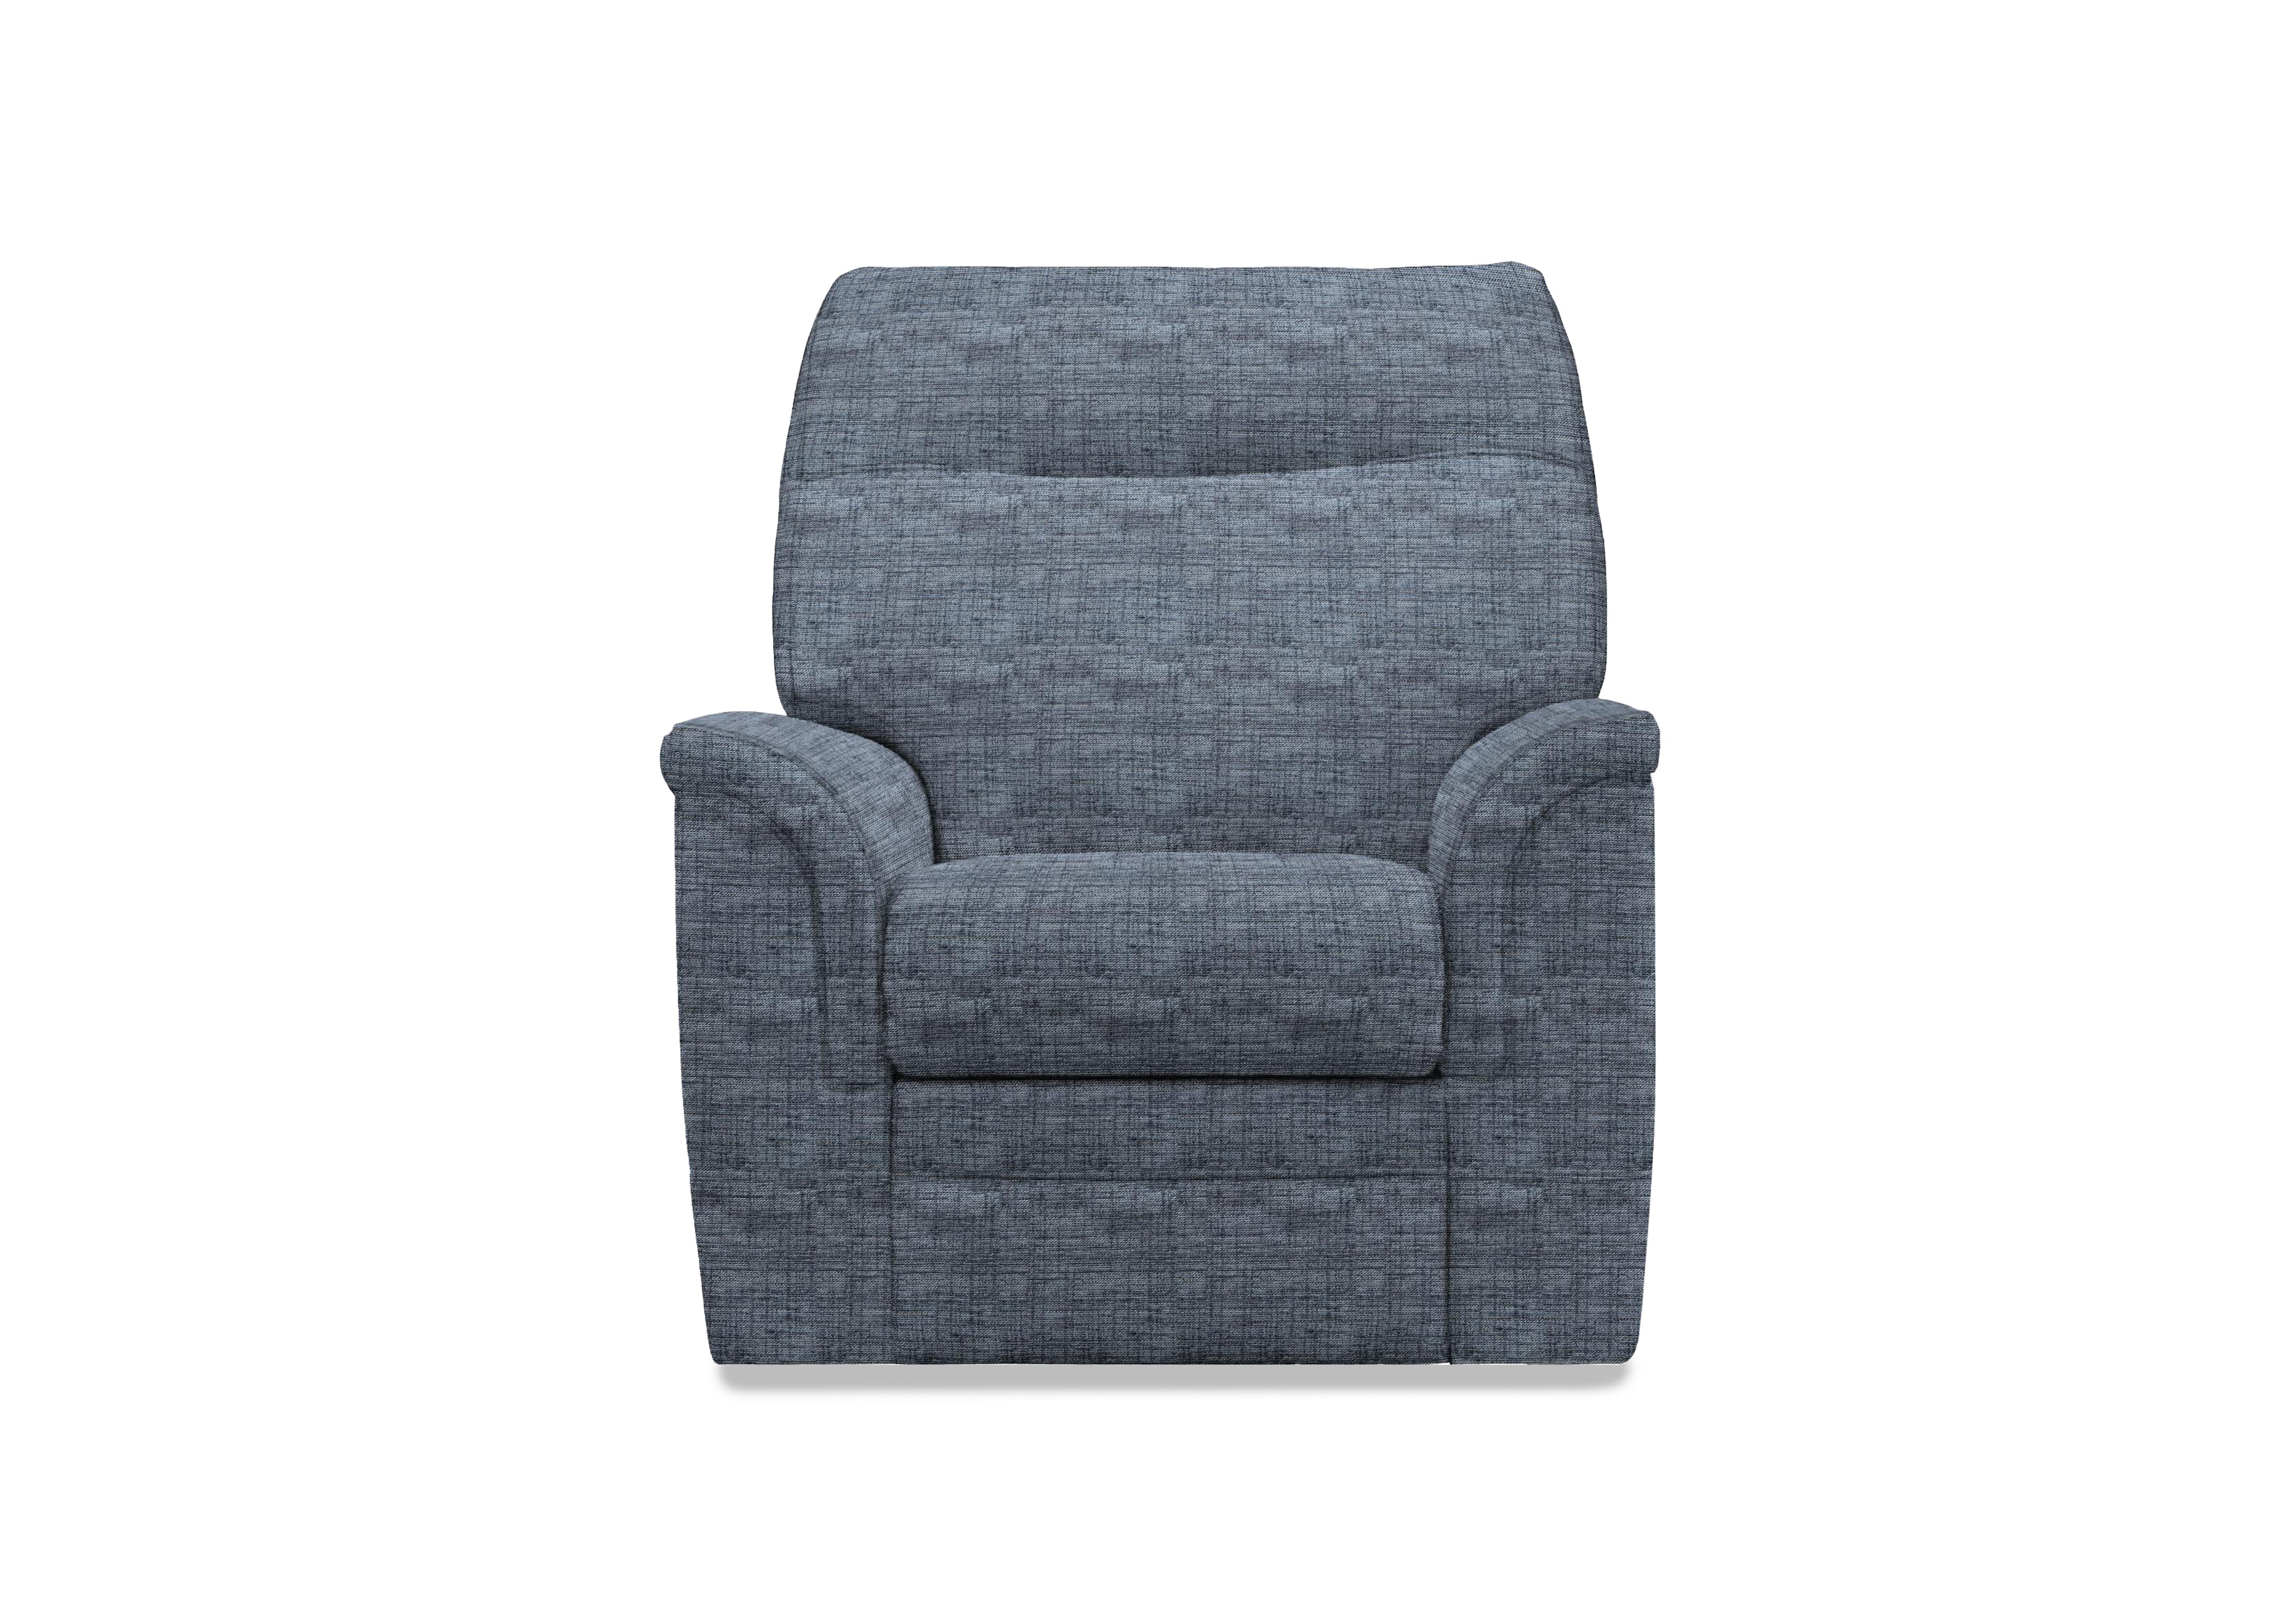 Hudson 23 Fabric Lift and Rise Chair in Dash Blue 001497-0080 on Furniture Village